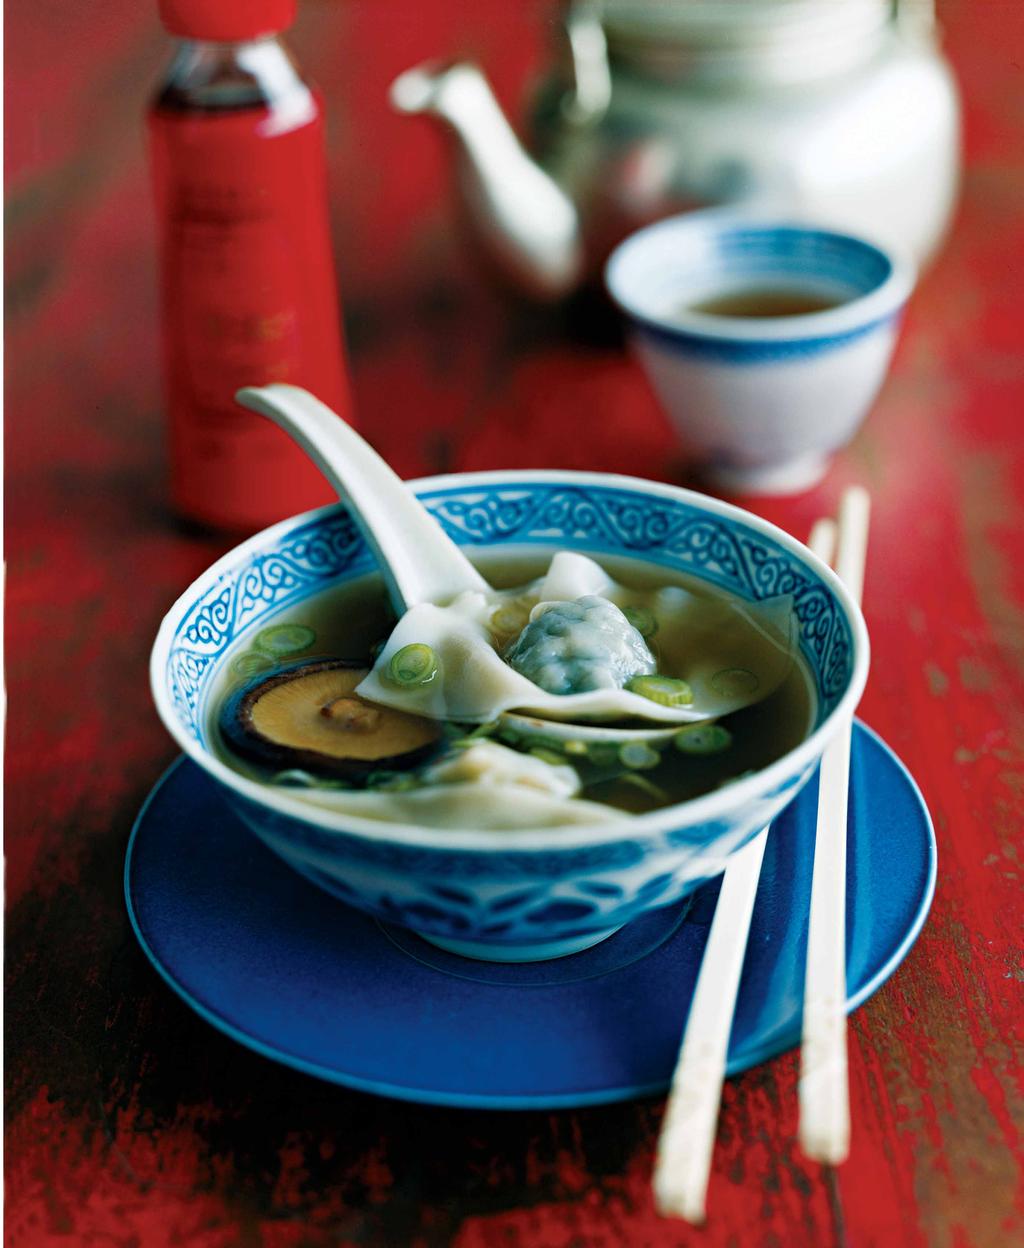 CHINA wontons A World of DUMPLINGS VIRTUALLY EVERY CUISINE HAS ITS OWN VERSION OF THE beloved dumpling, WHETHER STEAMED OR FRIED, STUFFED WITH